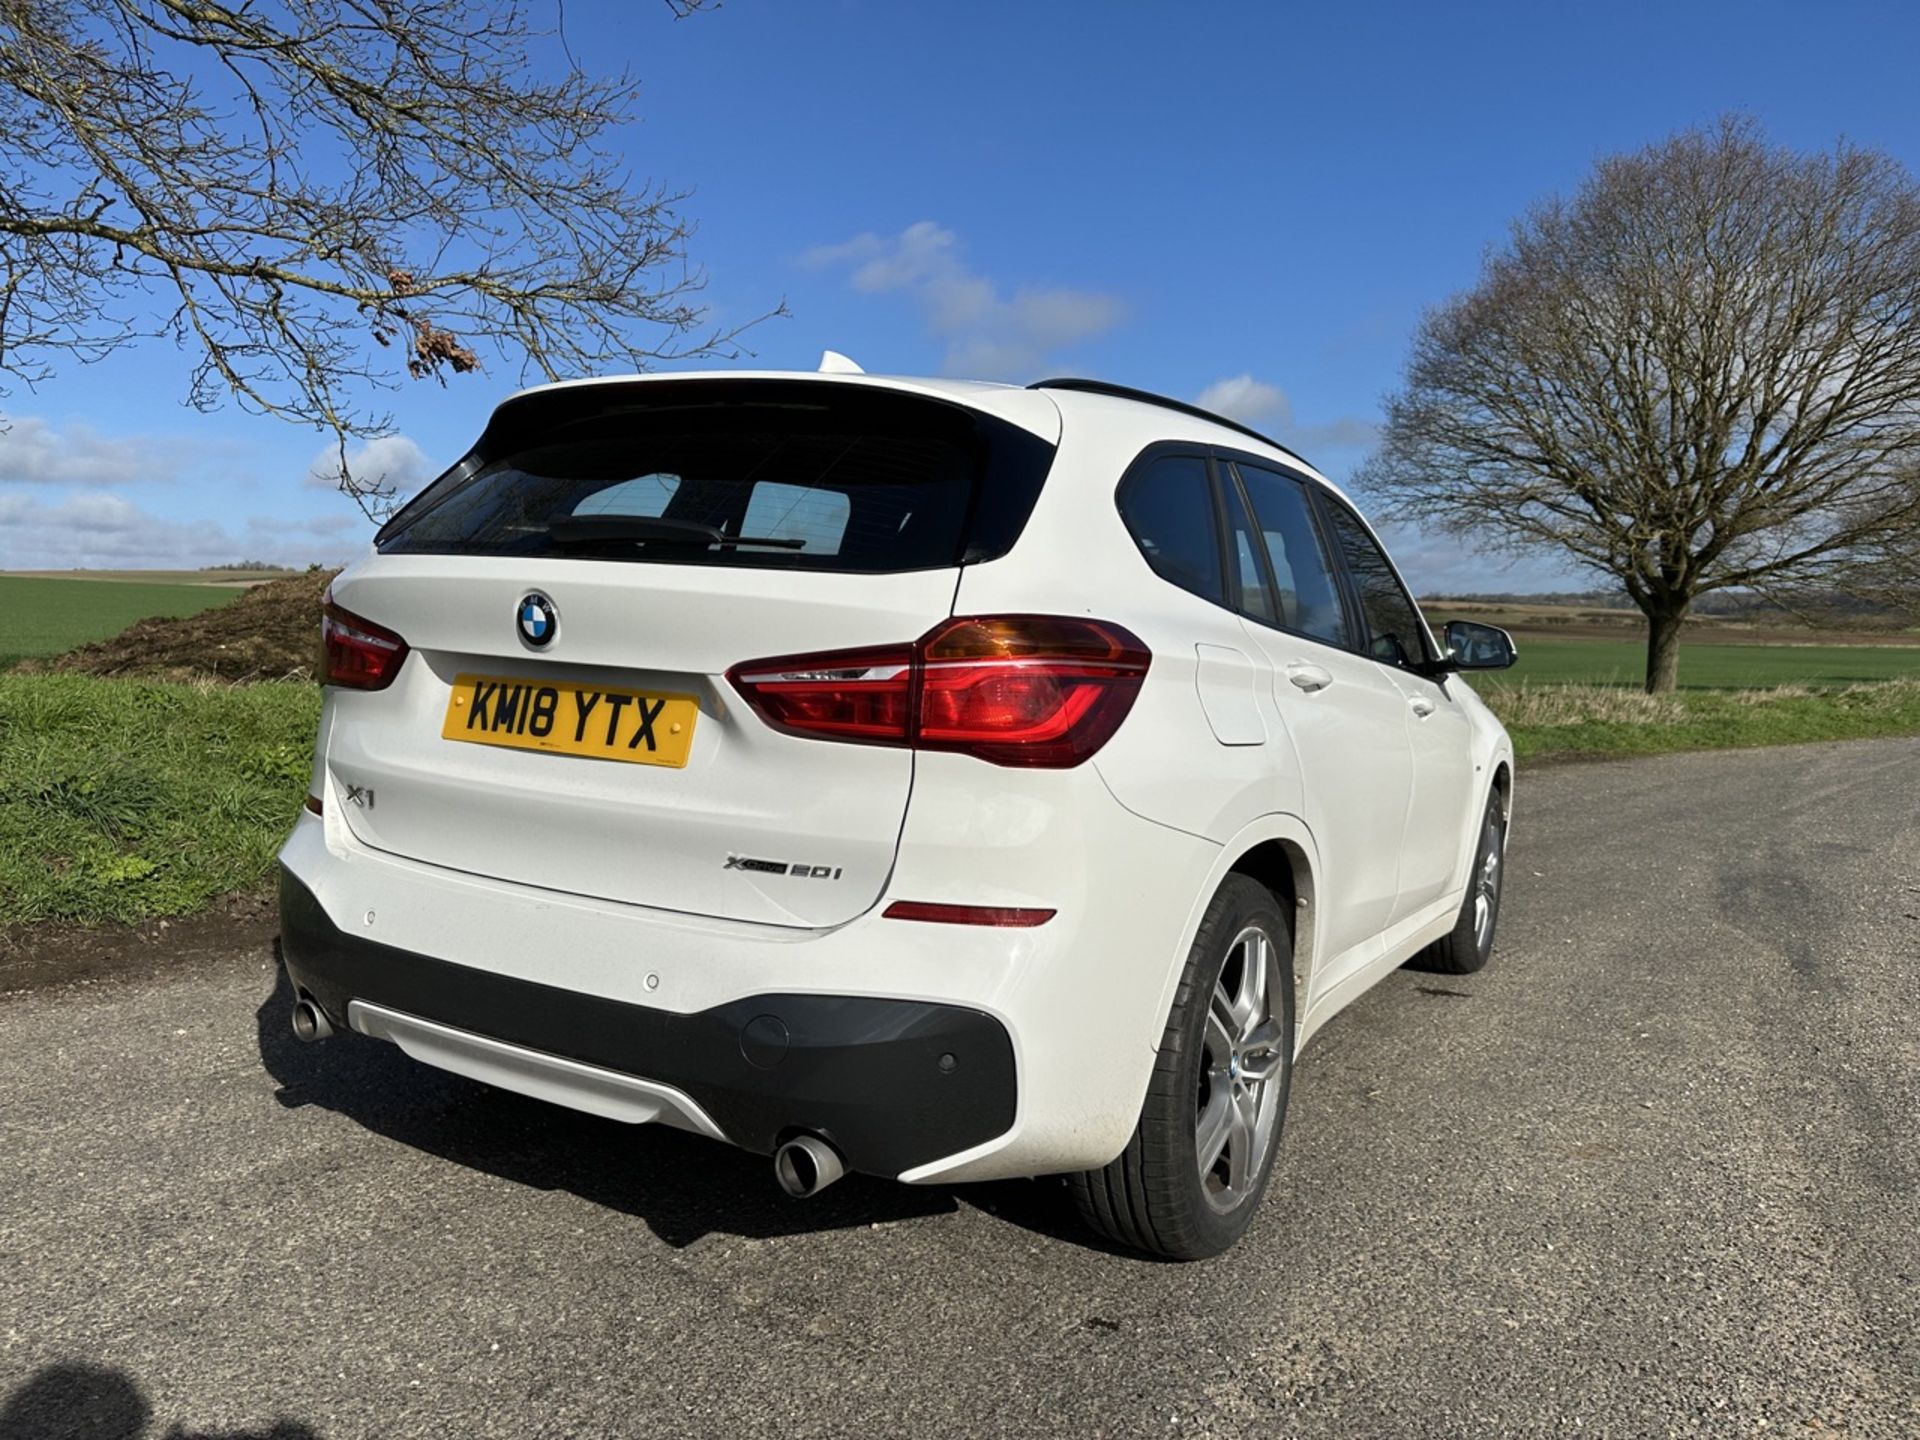 BMW X1 Xdrive20i M Sport Auto 20i - 2018 - 16.5k MILES ONLY - M SPORT Seats/badging - Image 5 of 22